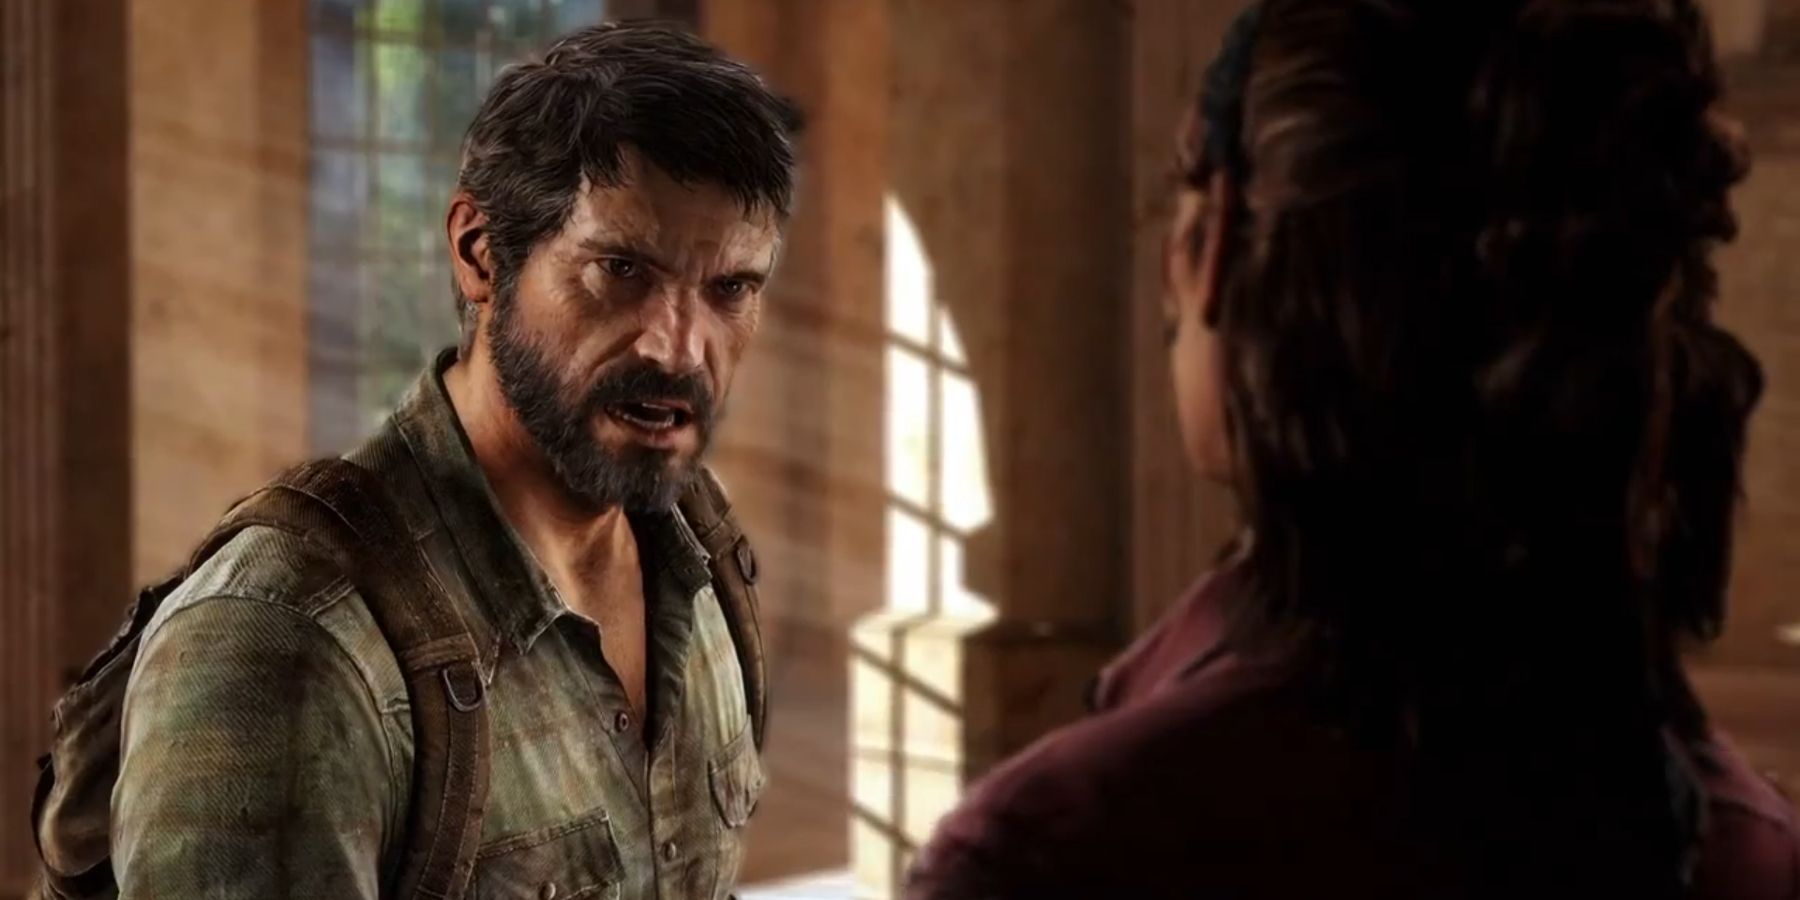 The Last of Us Fan Shares Drawing of Joel With Dishonored-Like Art Style